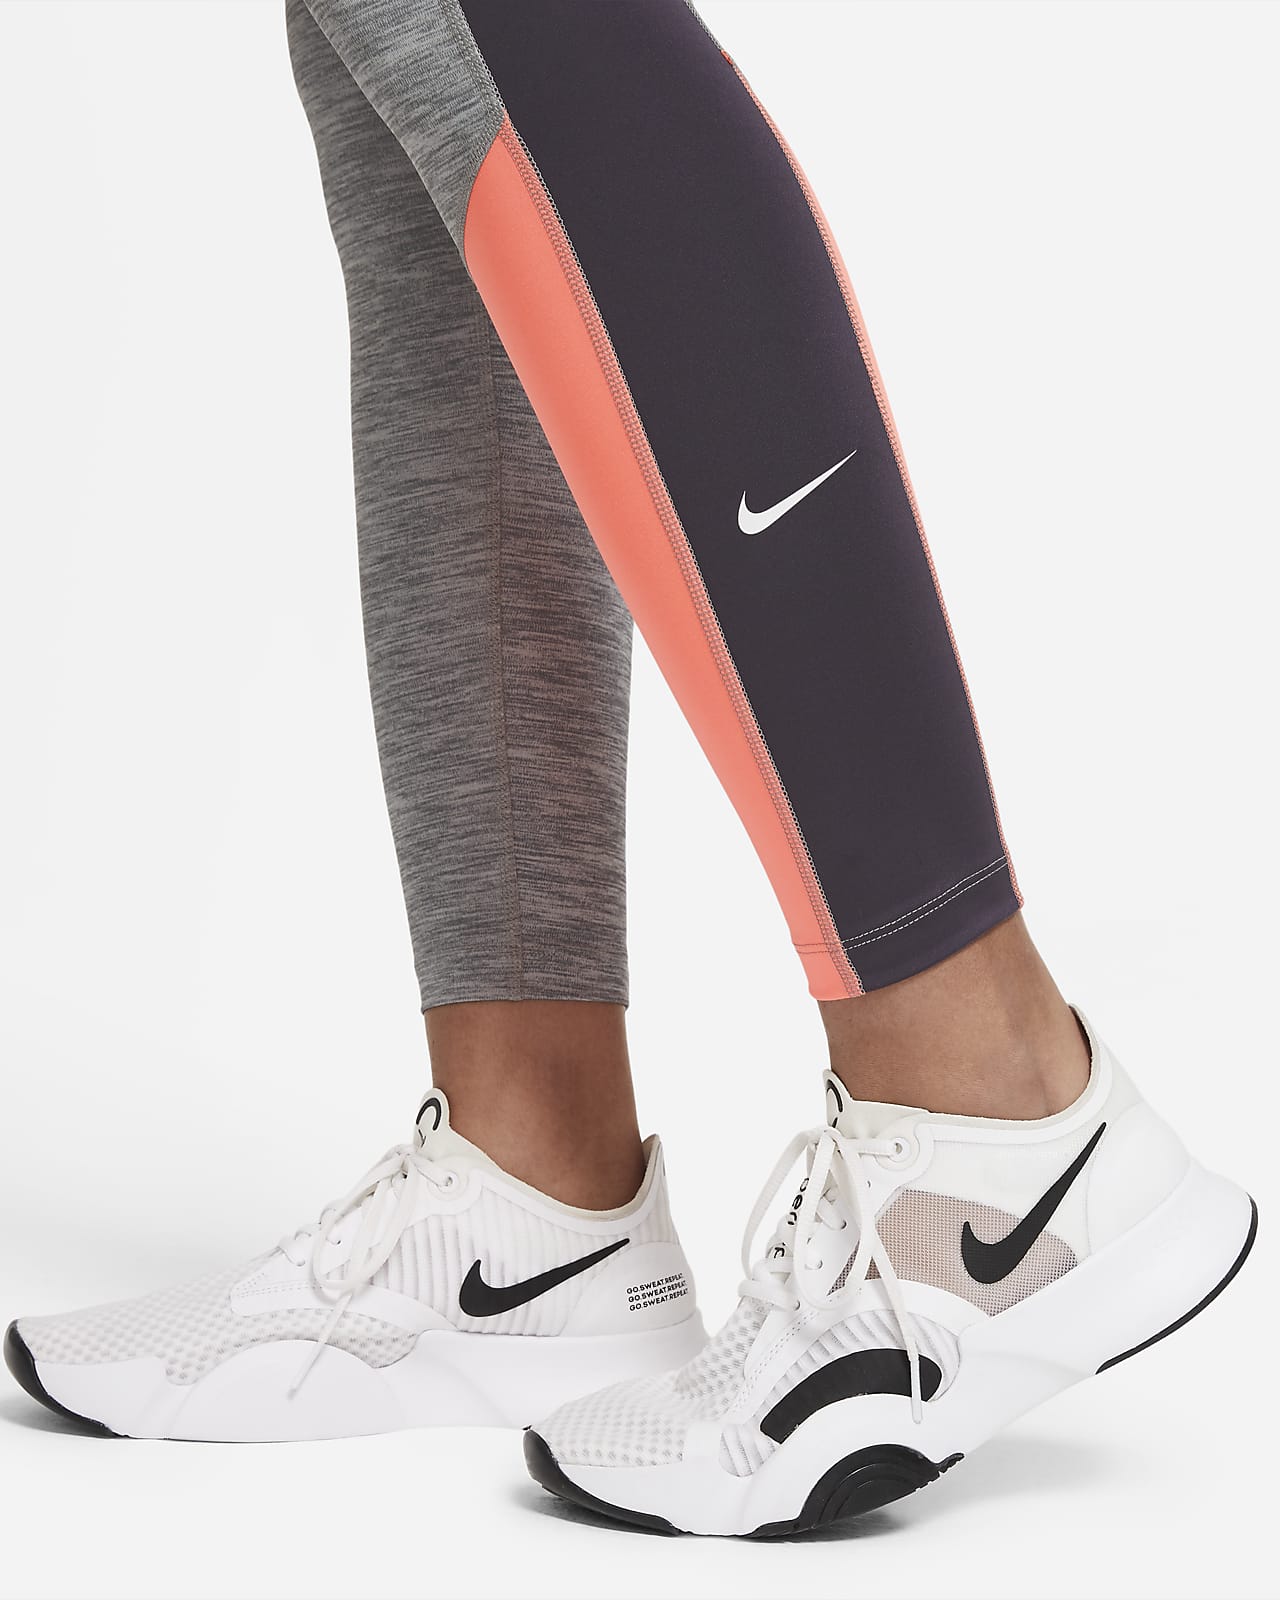 nike one color block tights